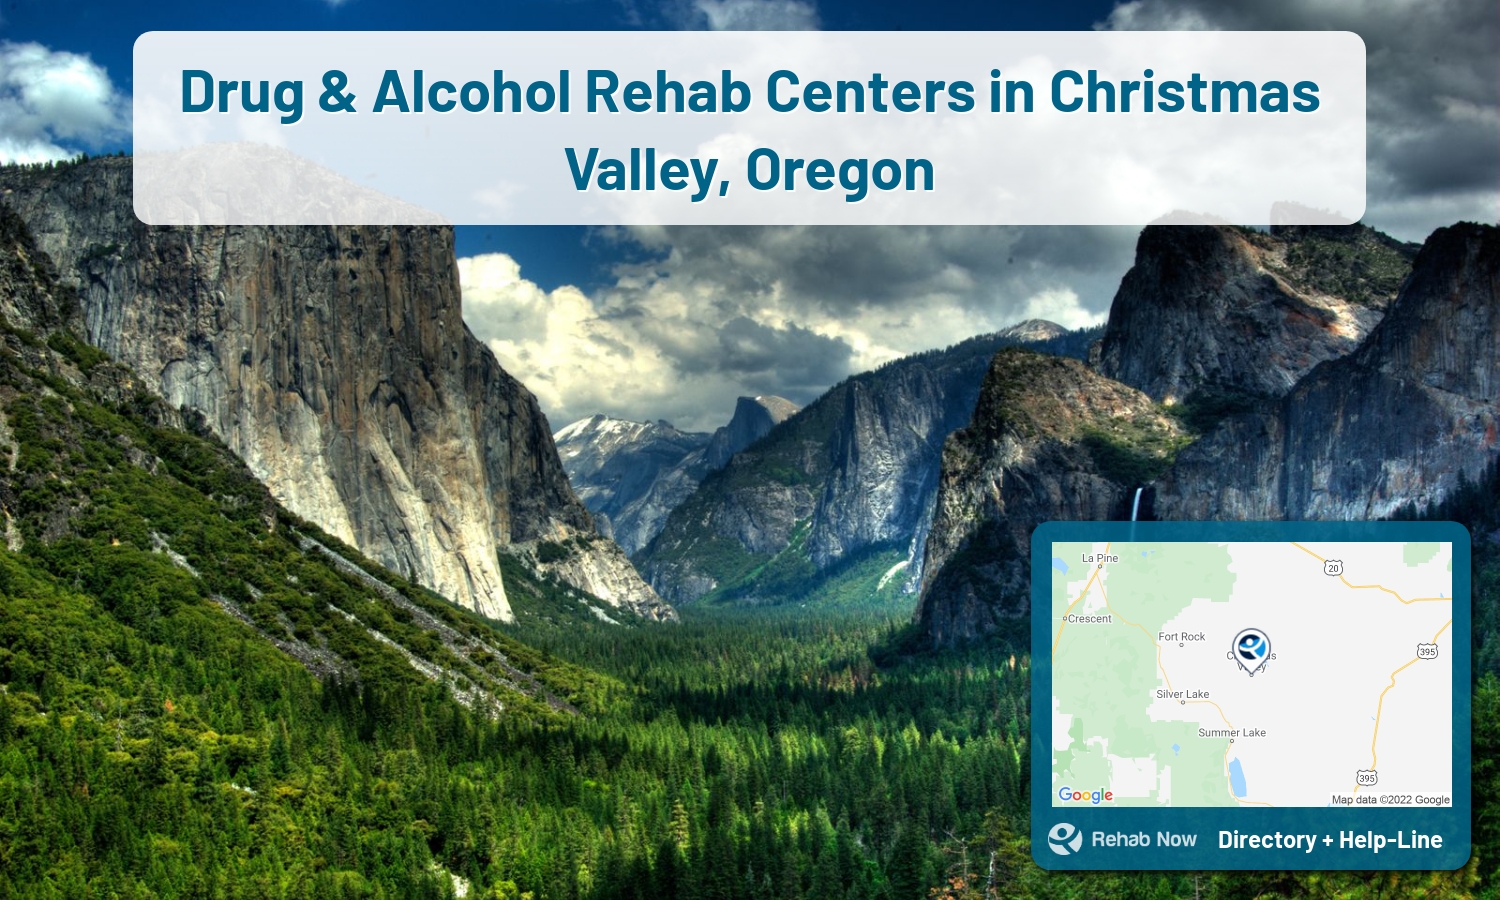 Find drug rehab and alcohol treatment services in Christmas Valley. Our experts help you find a center in Christmas Valley, Oregon